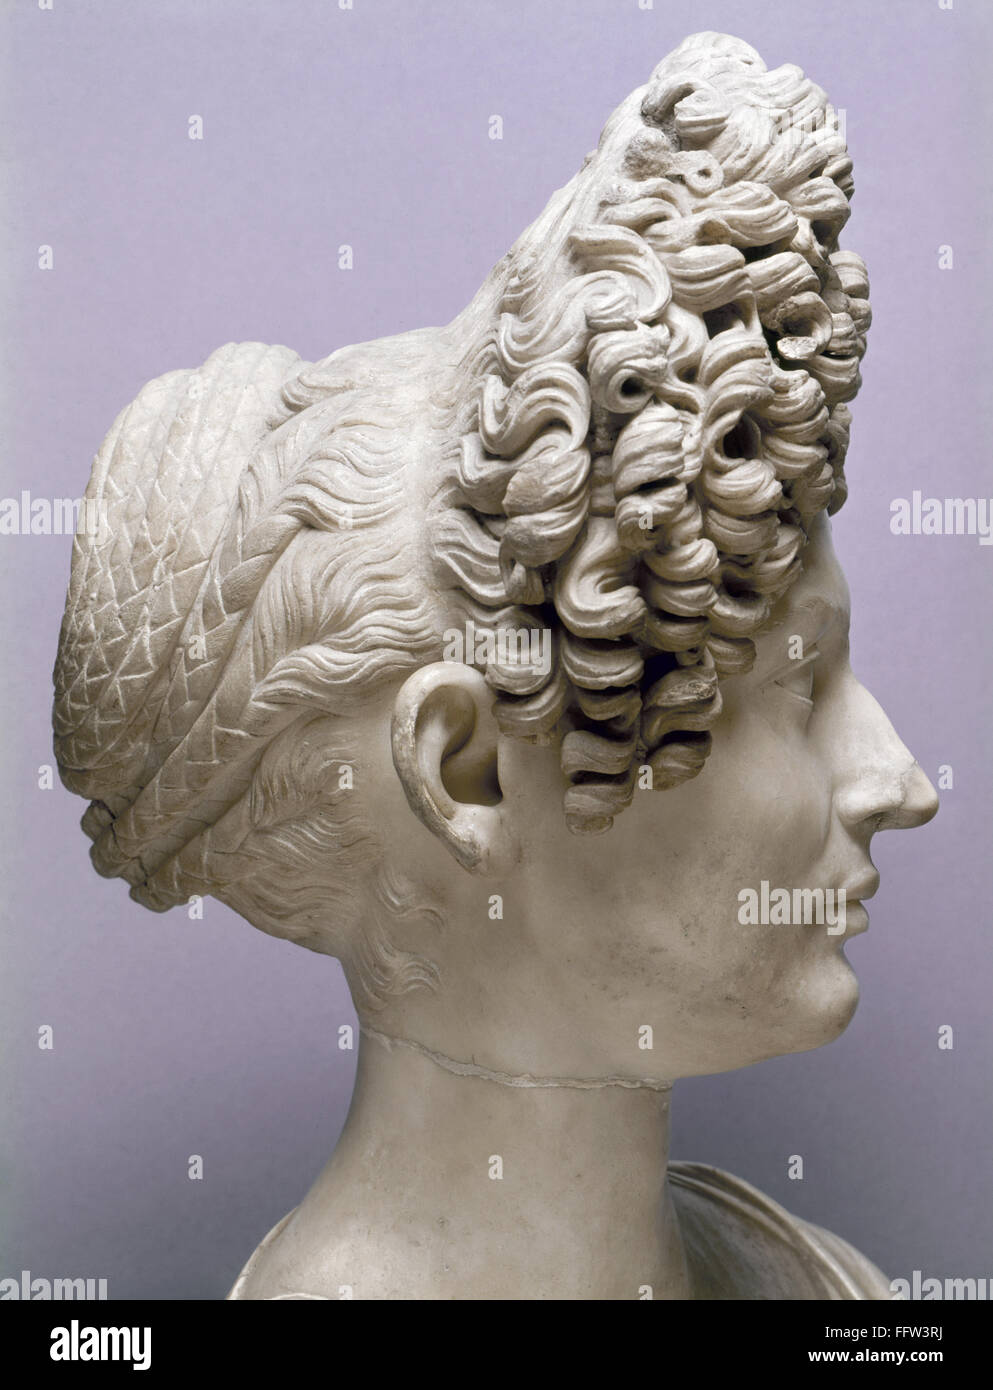 ANCIENT ROME: HAIRSTYLES. /nPortrait bust of a Roman aristocratic woman with hairstyle of the Flavian period, known as the Fonseca bust, late 1st-early 2nd century A.D. Stock Photo